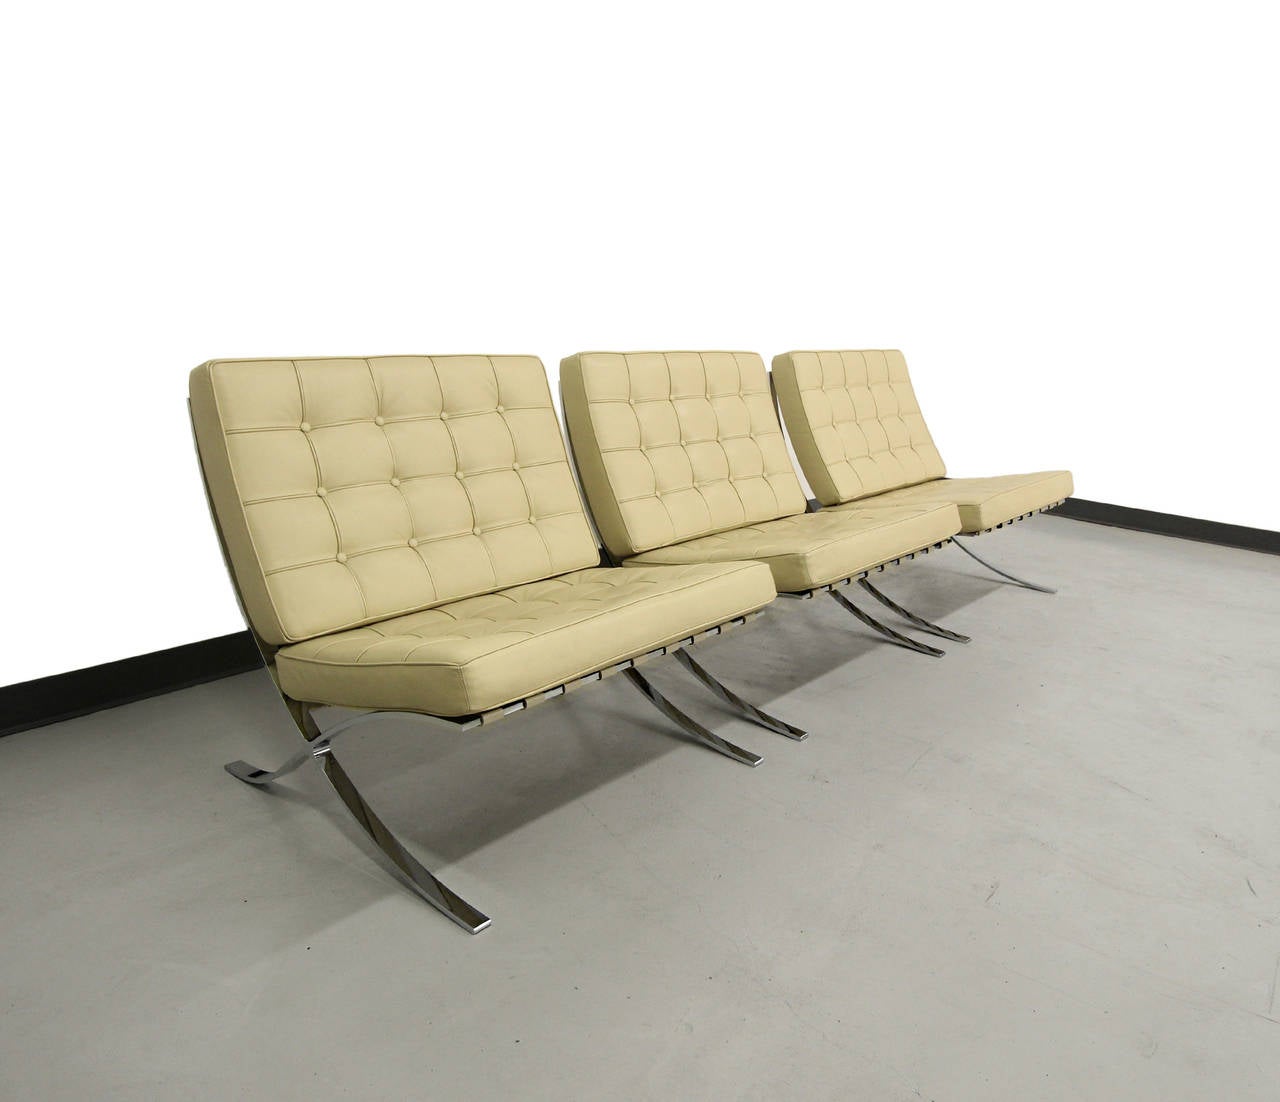 We have 3 all original, early and authentic, Mies van der Rohe for Knoll Barcelona chairs.  Chairs are most likely from the 60's and retain their original cream leather cushions which are in excellent condition.  Chrome is mirrored and perfect.  See